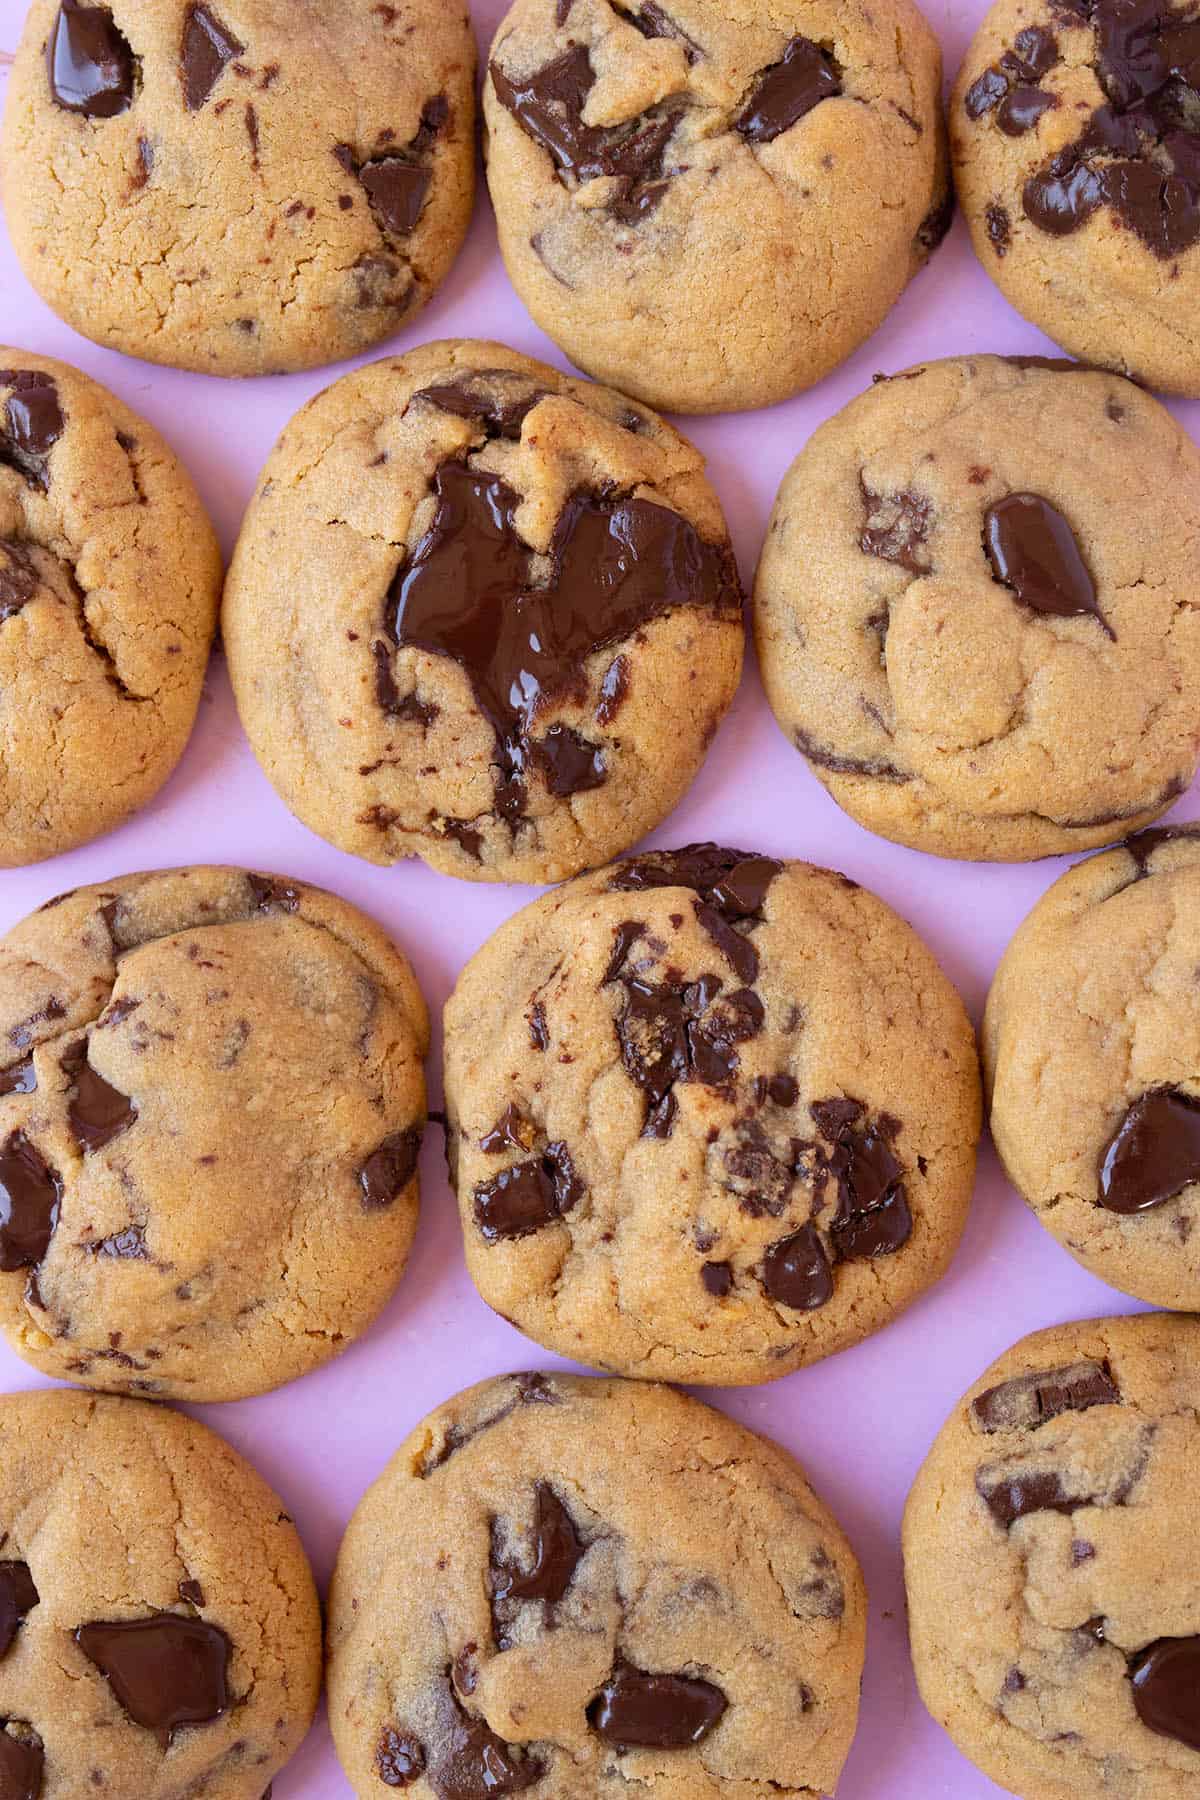 Top view of beautiful Peanut Butter Chocolate Chip Cookies on a purple background.